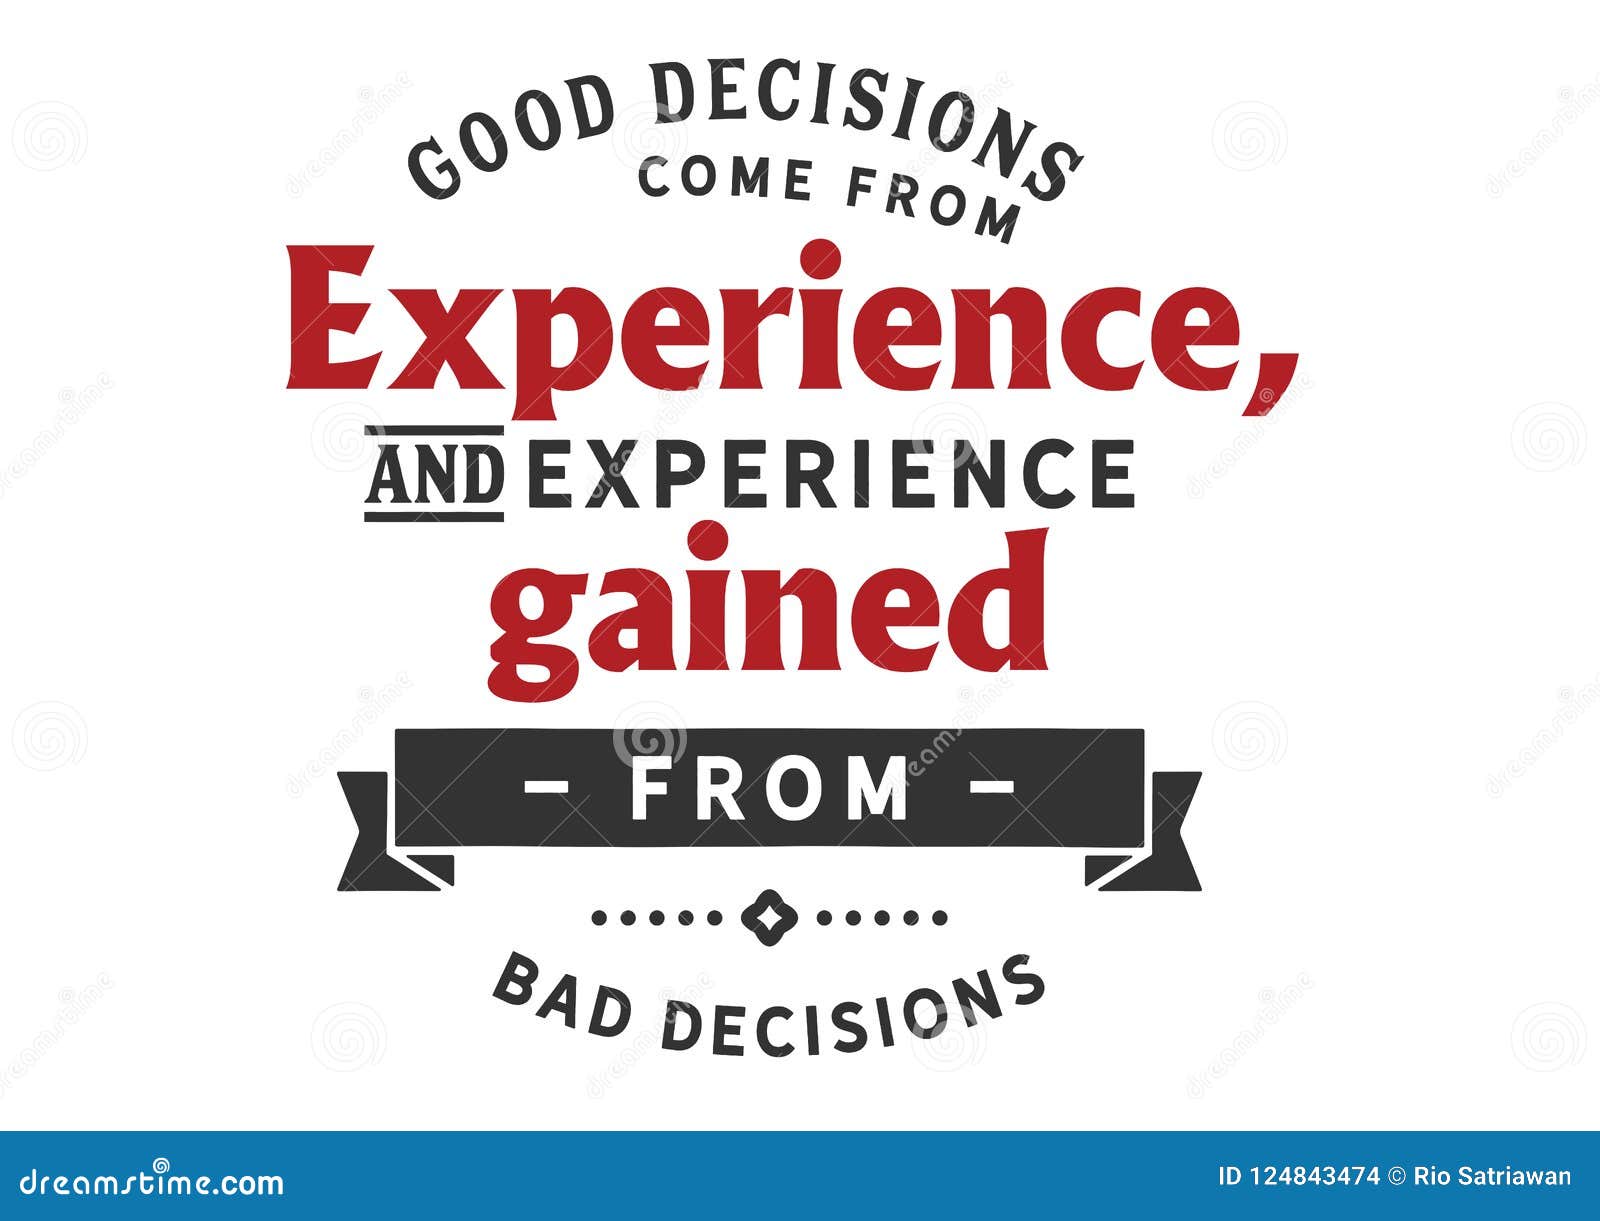 good decisions come from experience, and experience gained from bad decisions